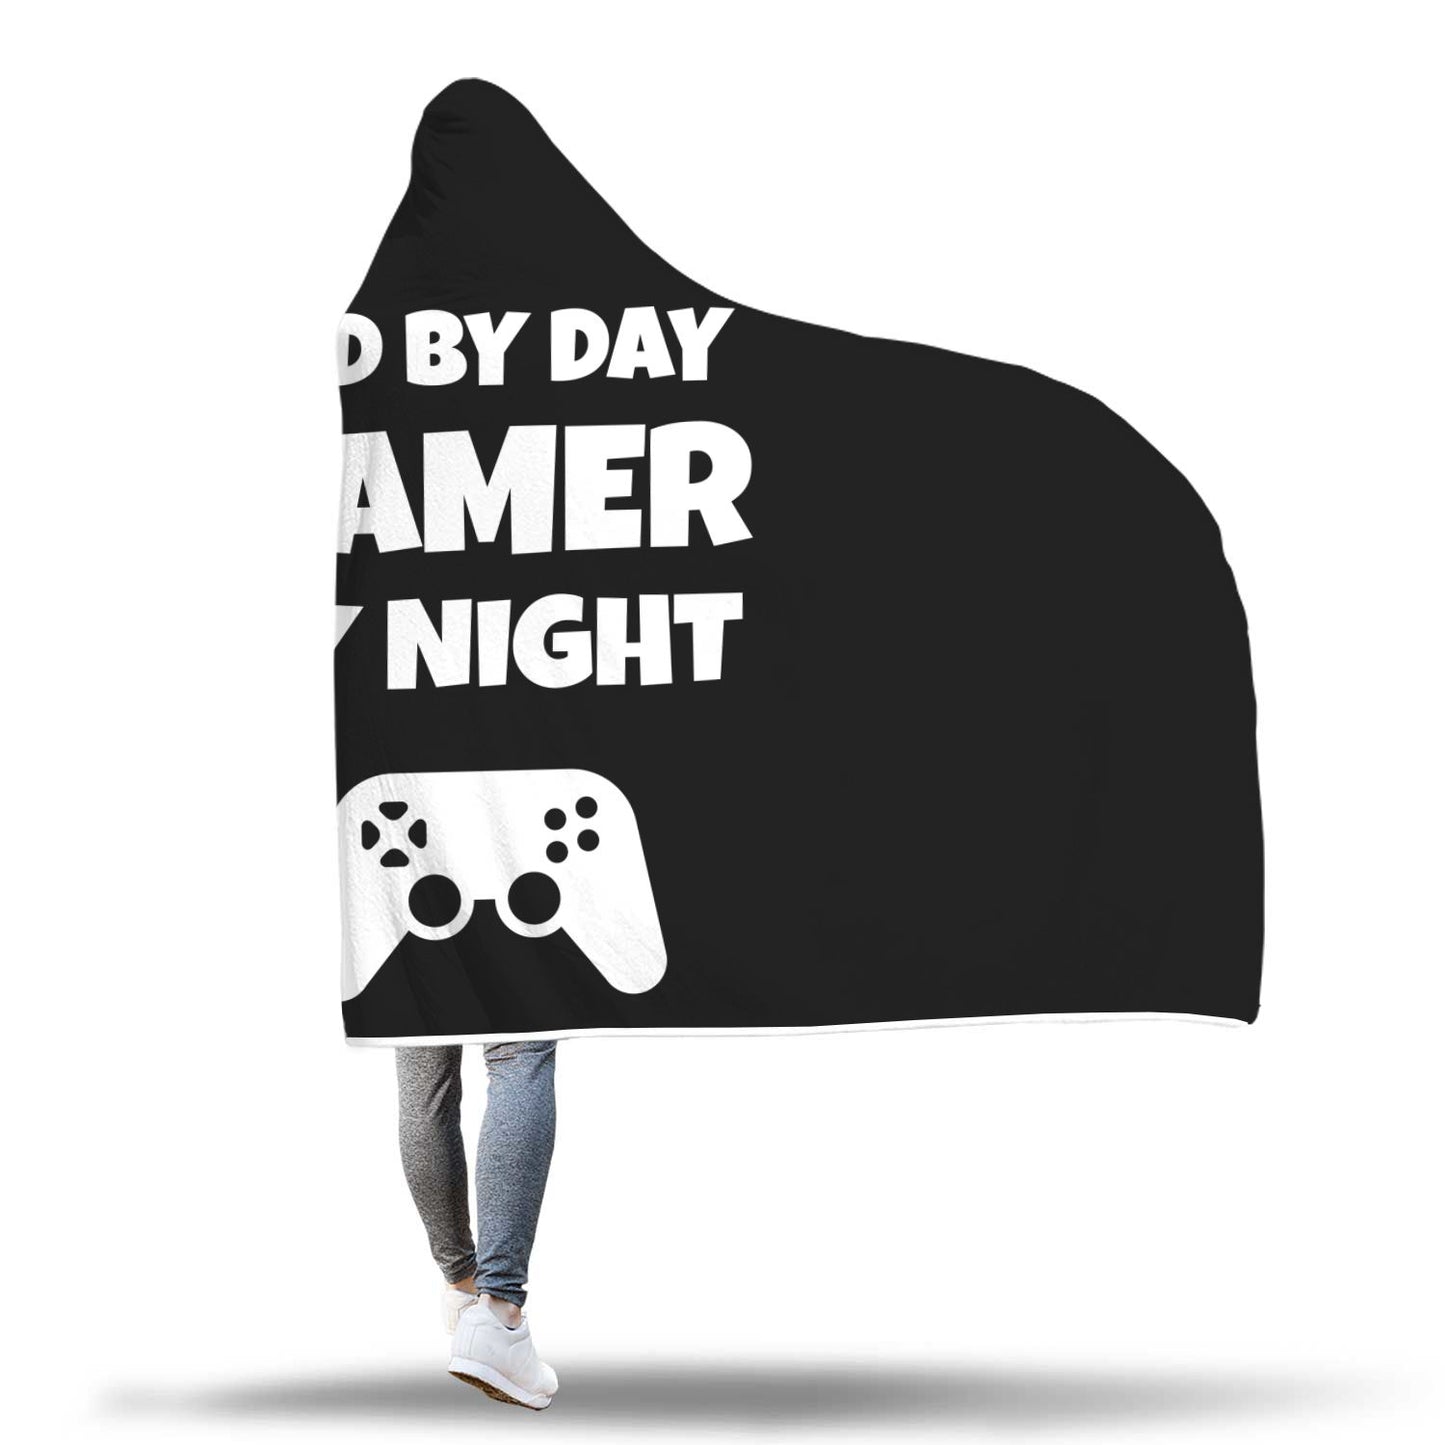 Dad By Day Gamer By Night Videogame Hooded Blanket